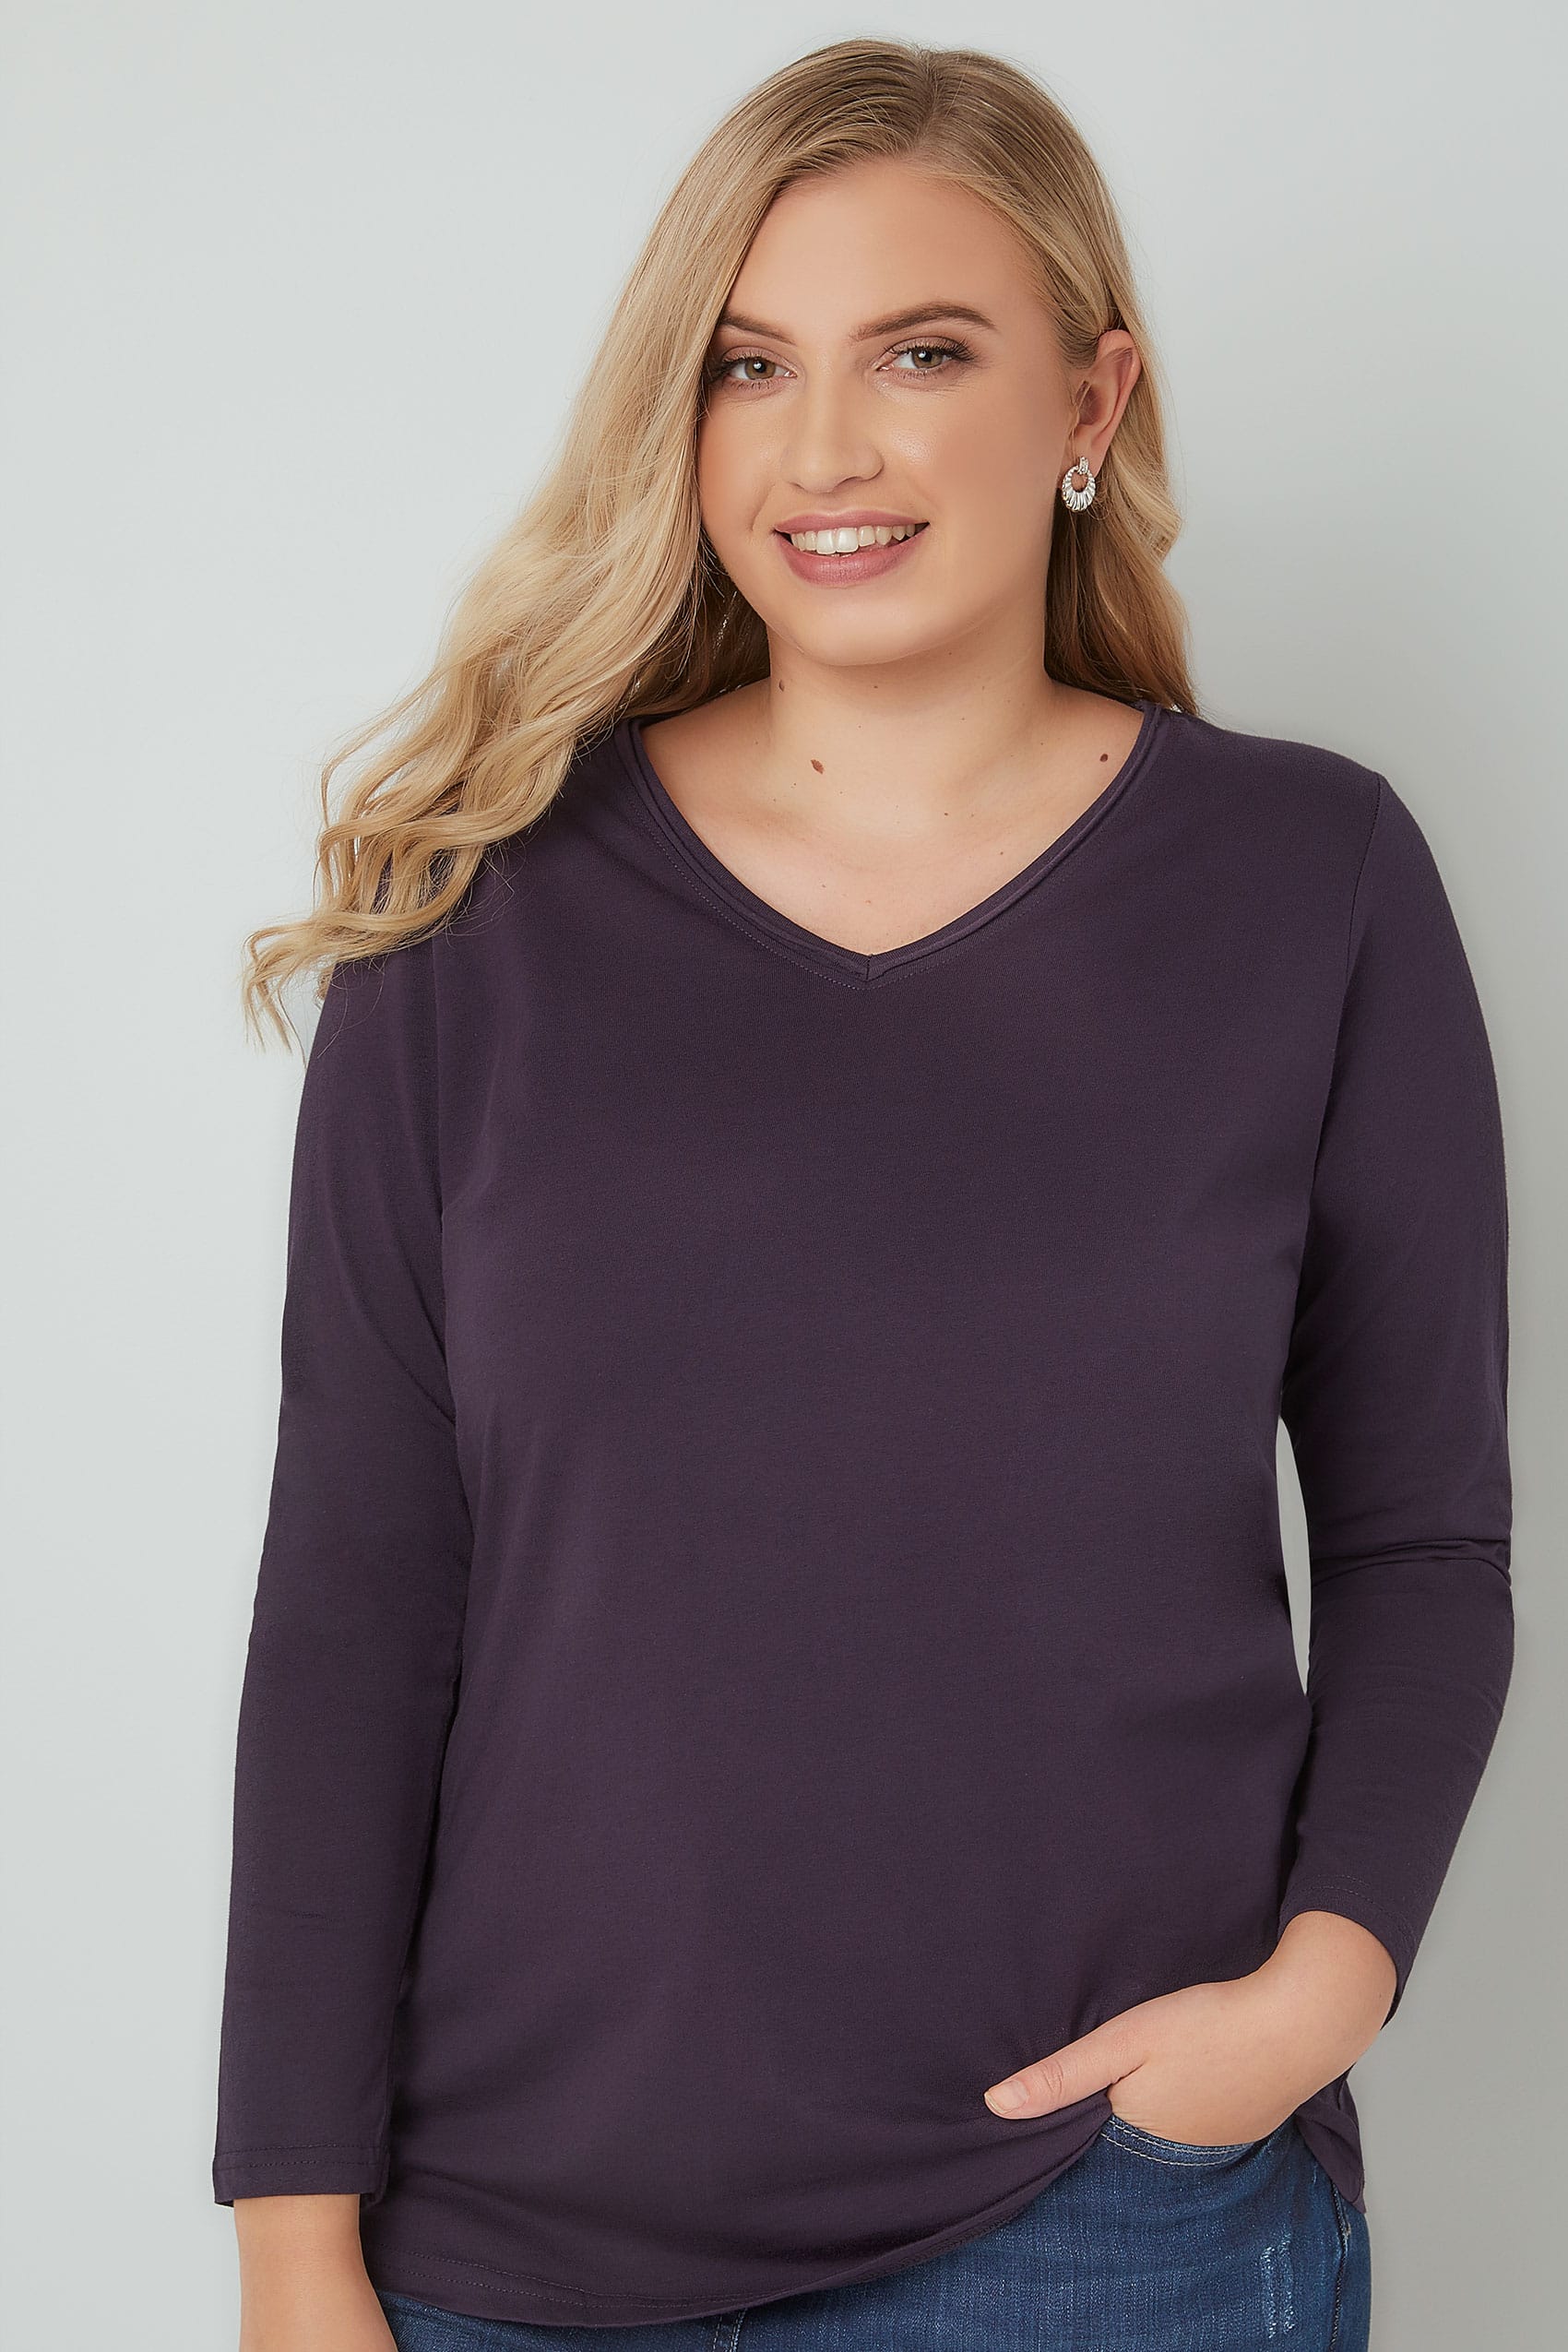 Purple Long Sleeved VNeck Jersey Top, Plus size 16 to 36